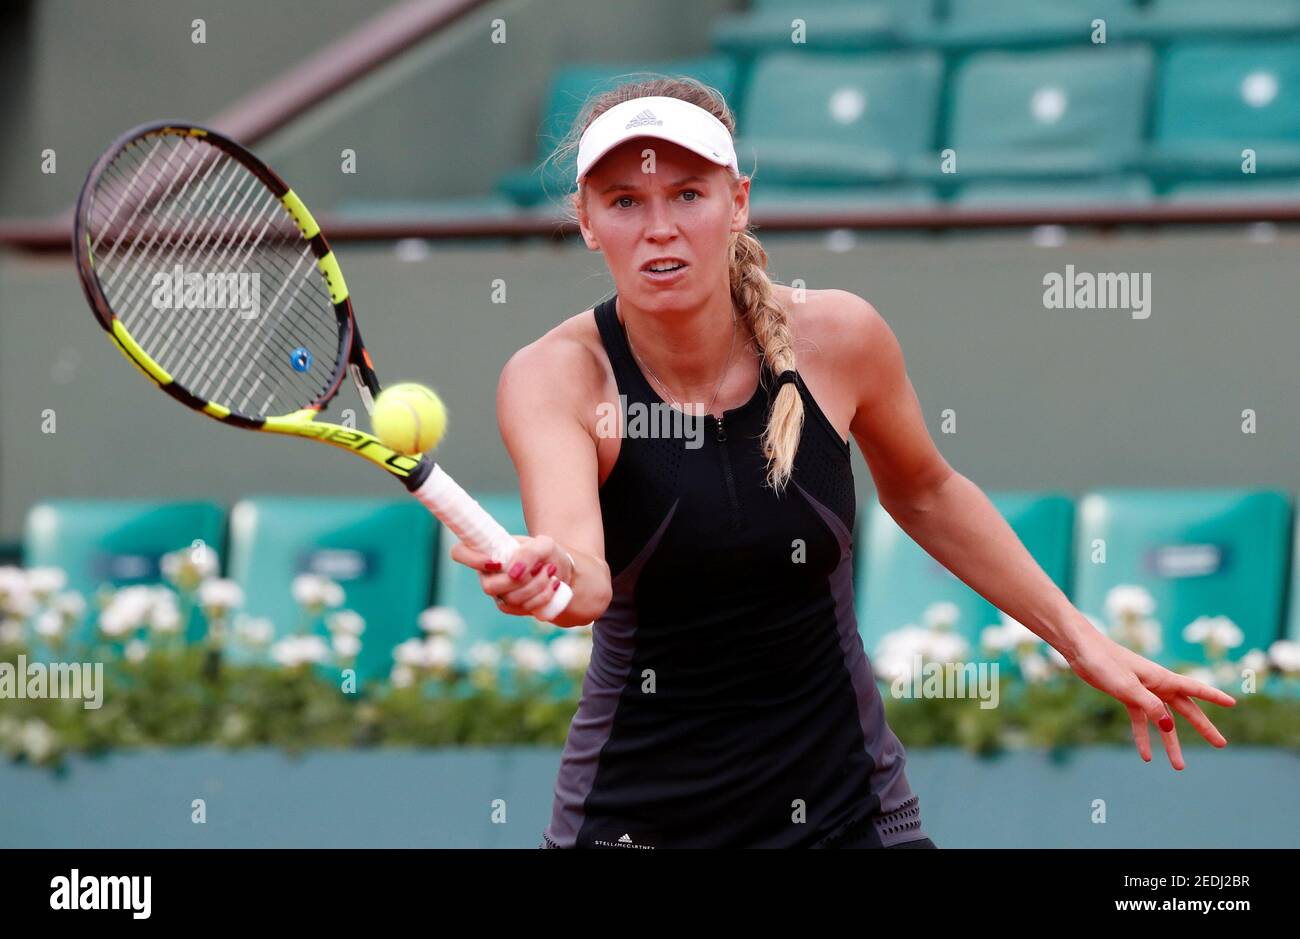 Tennis - French Open - Roland Garros, Paris, France - May 30, 2018  Denmark's Caroline Wozniacki in action during her second round match  against Spain's Georgina Garcia Perez REUTERS/Pascal Rossignol Stock Photo  - Alamy